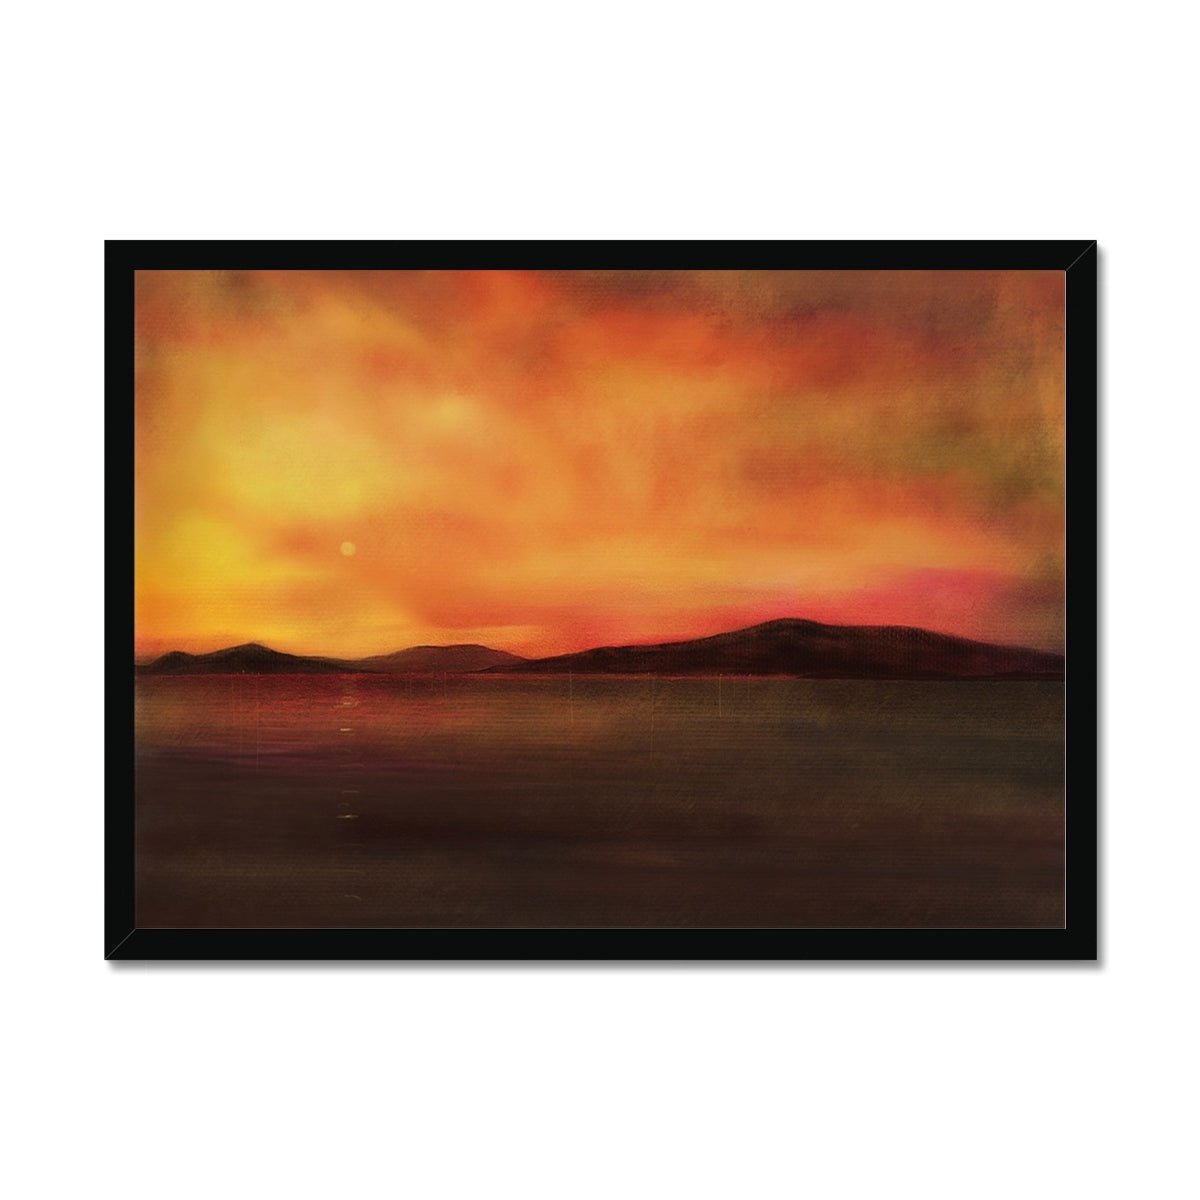 Isle Of Harris Sunset Painting | Framed Prints From Scotland-Framed Prints-Hebridean Islands Art Gallery-A2 Landscape-Black Frame-Paintings, Prints, Homeware, Art Gifts From Scotland By Scottish Artist Kevin Hunter